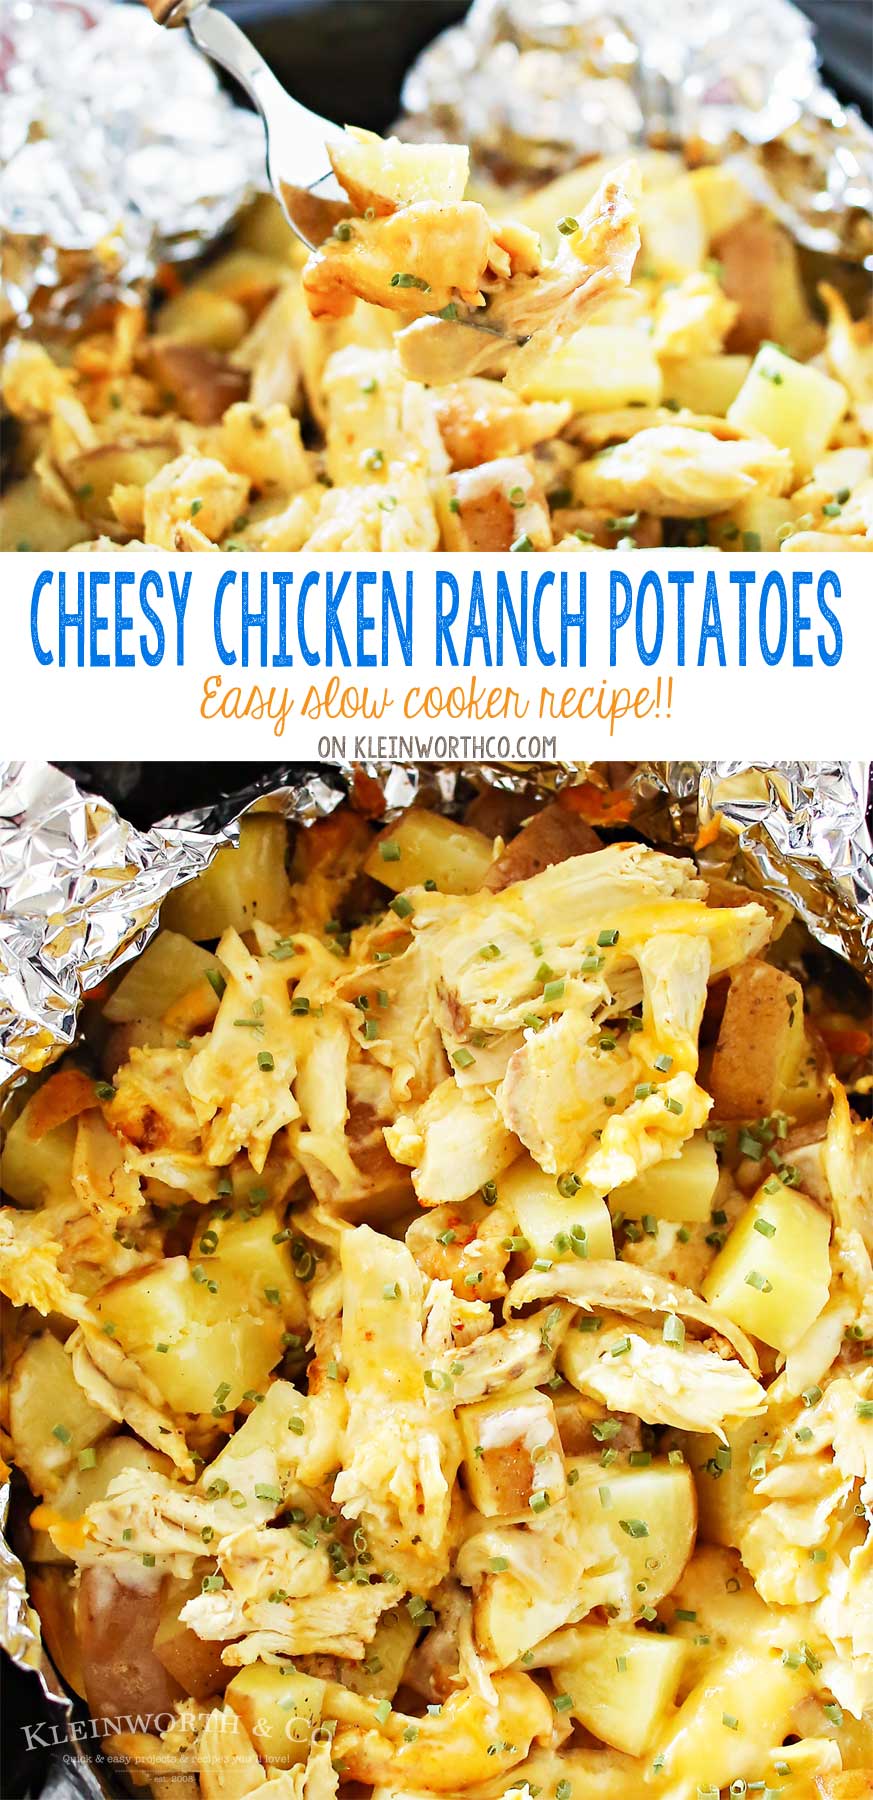 Cheesy Chicken Ranch Potatoes are a simple slow cooker side dish recipe that's so delicious. Just another easy family dinner idea that's ready in just 4 hours. OMG- these are SO GOOD! LOVE that this recipe is family size & uses rotisserie chicken!